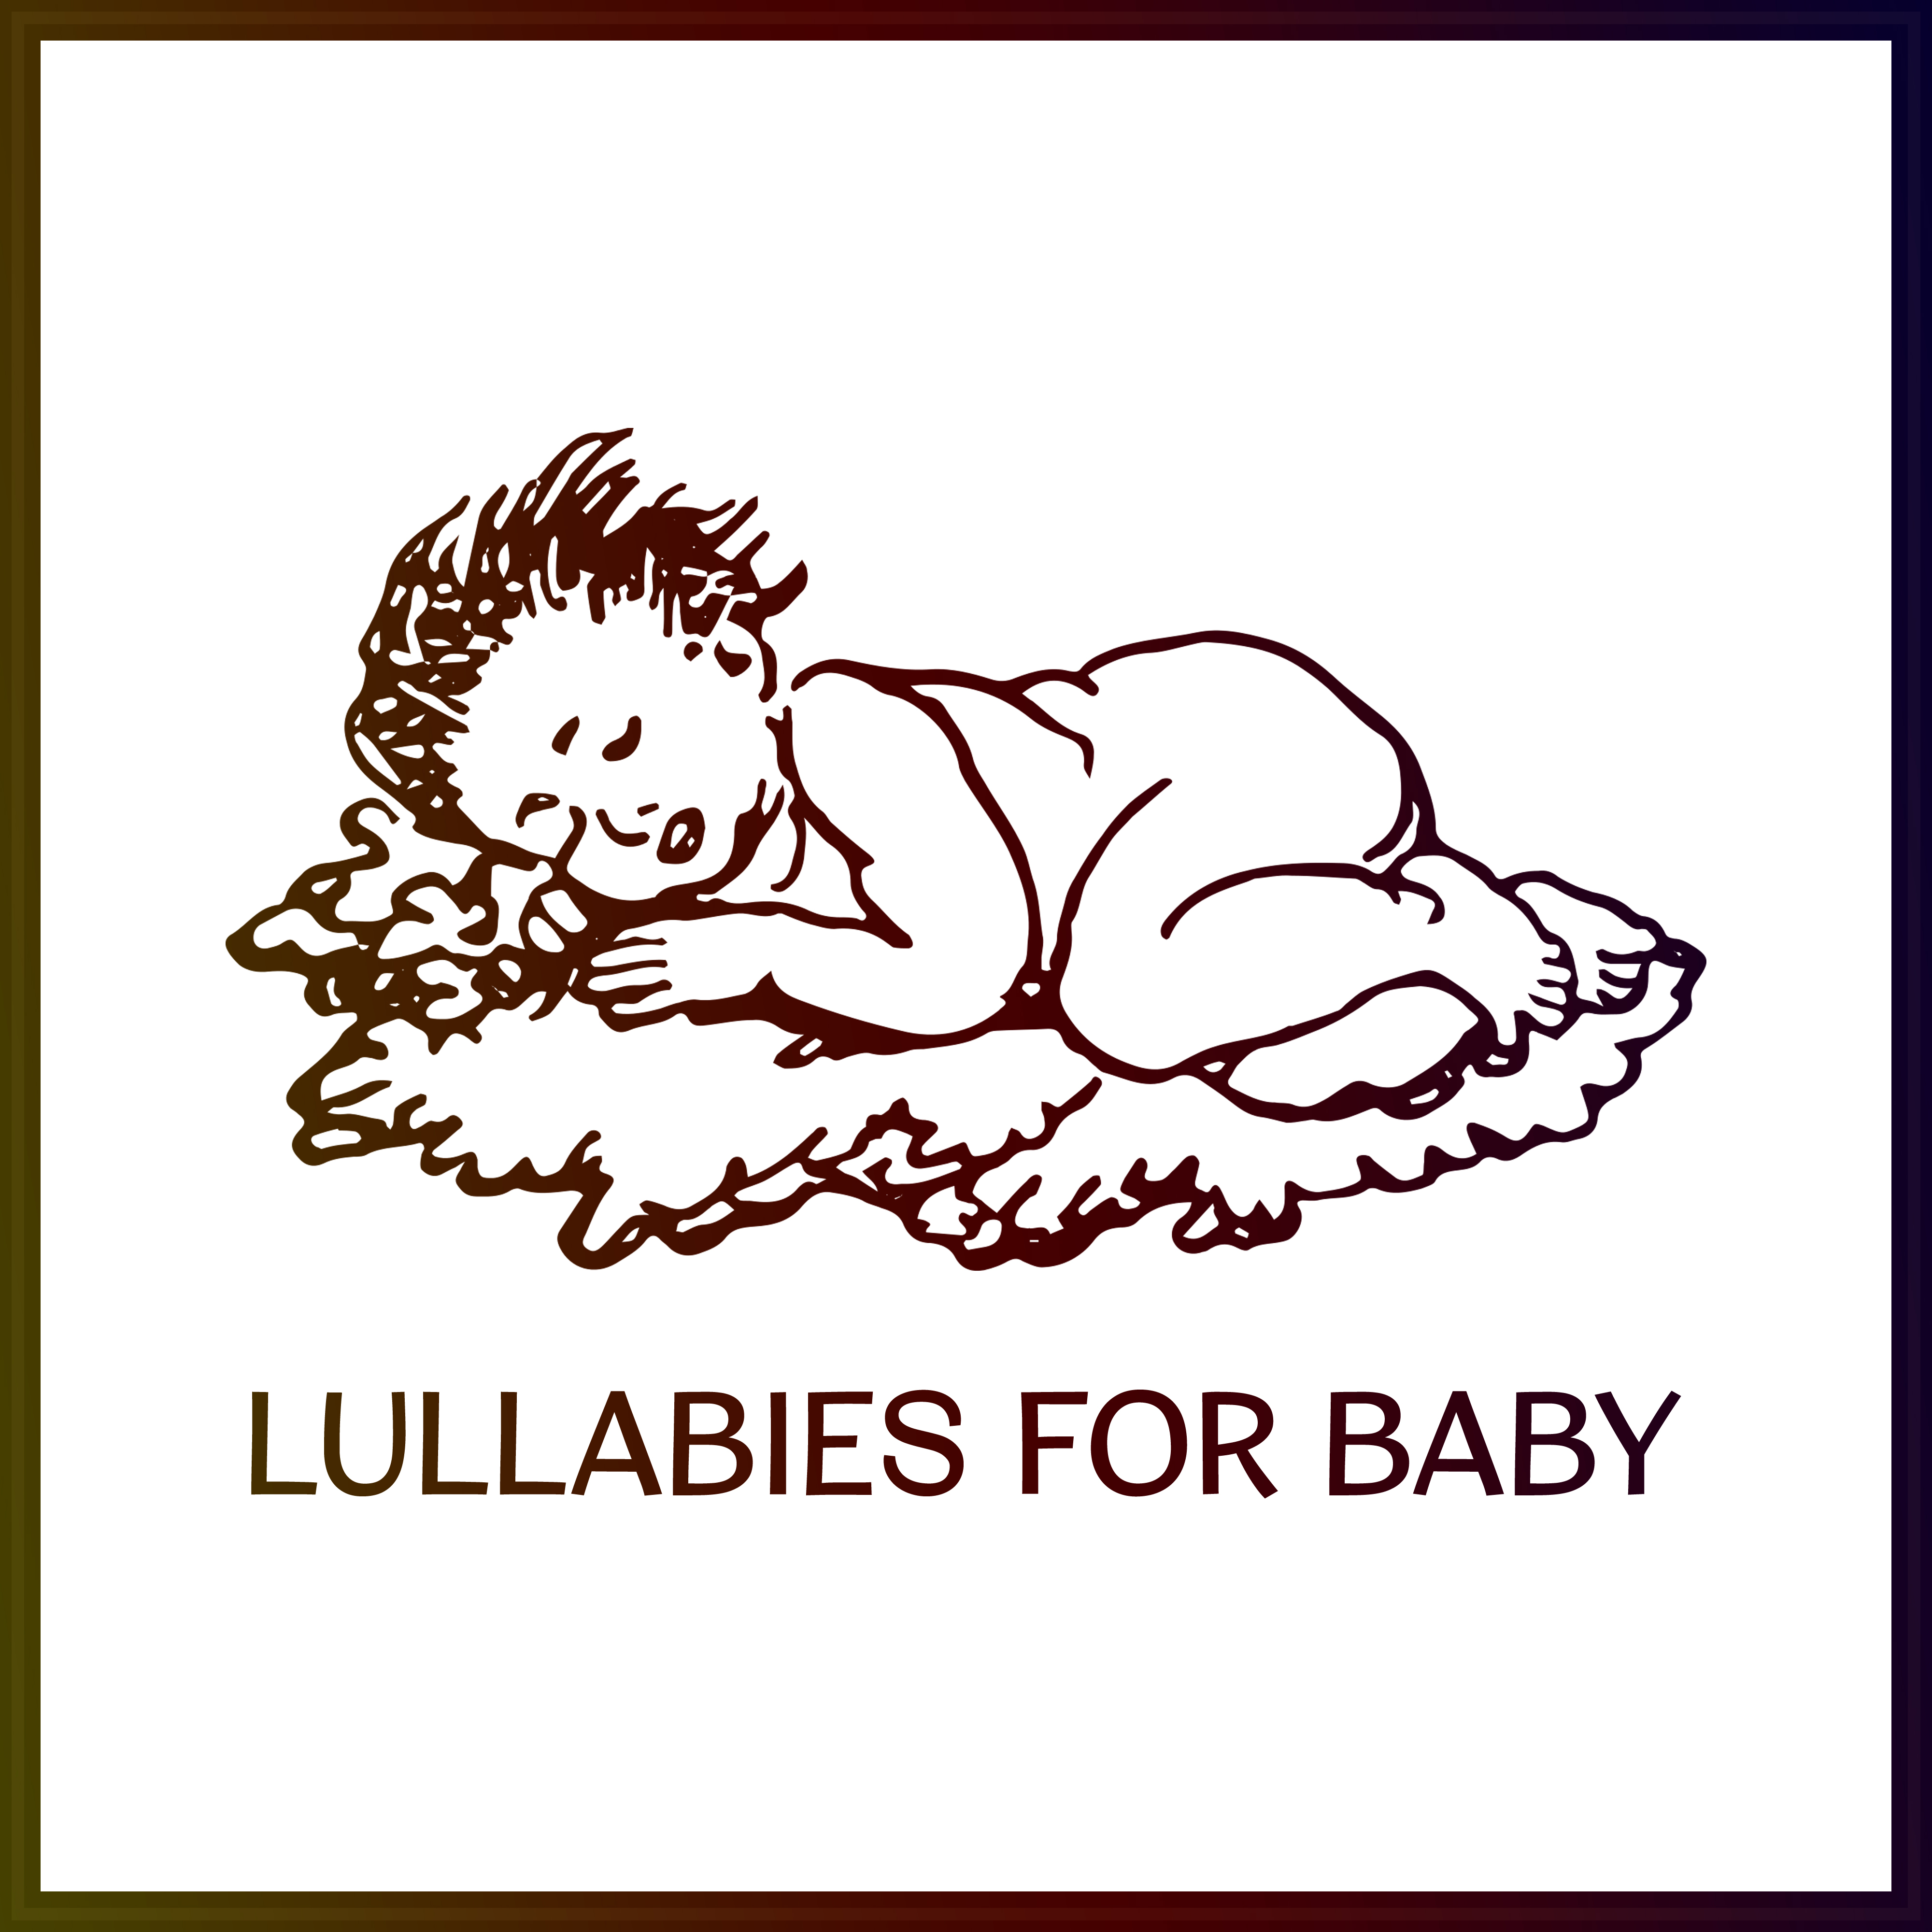 Lullabies for Baby – Pure Mind, Deep Sleep, Bedtime, Peaceful Music to Pillow, Calm Down, Sweet Dreams at Night